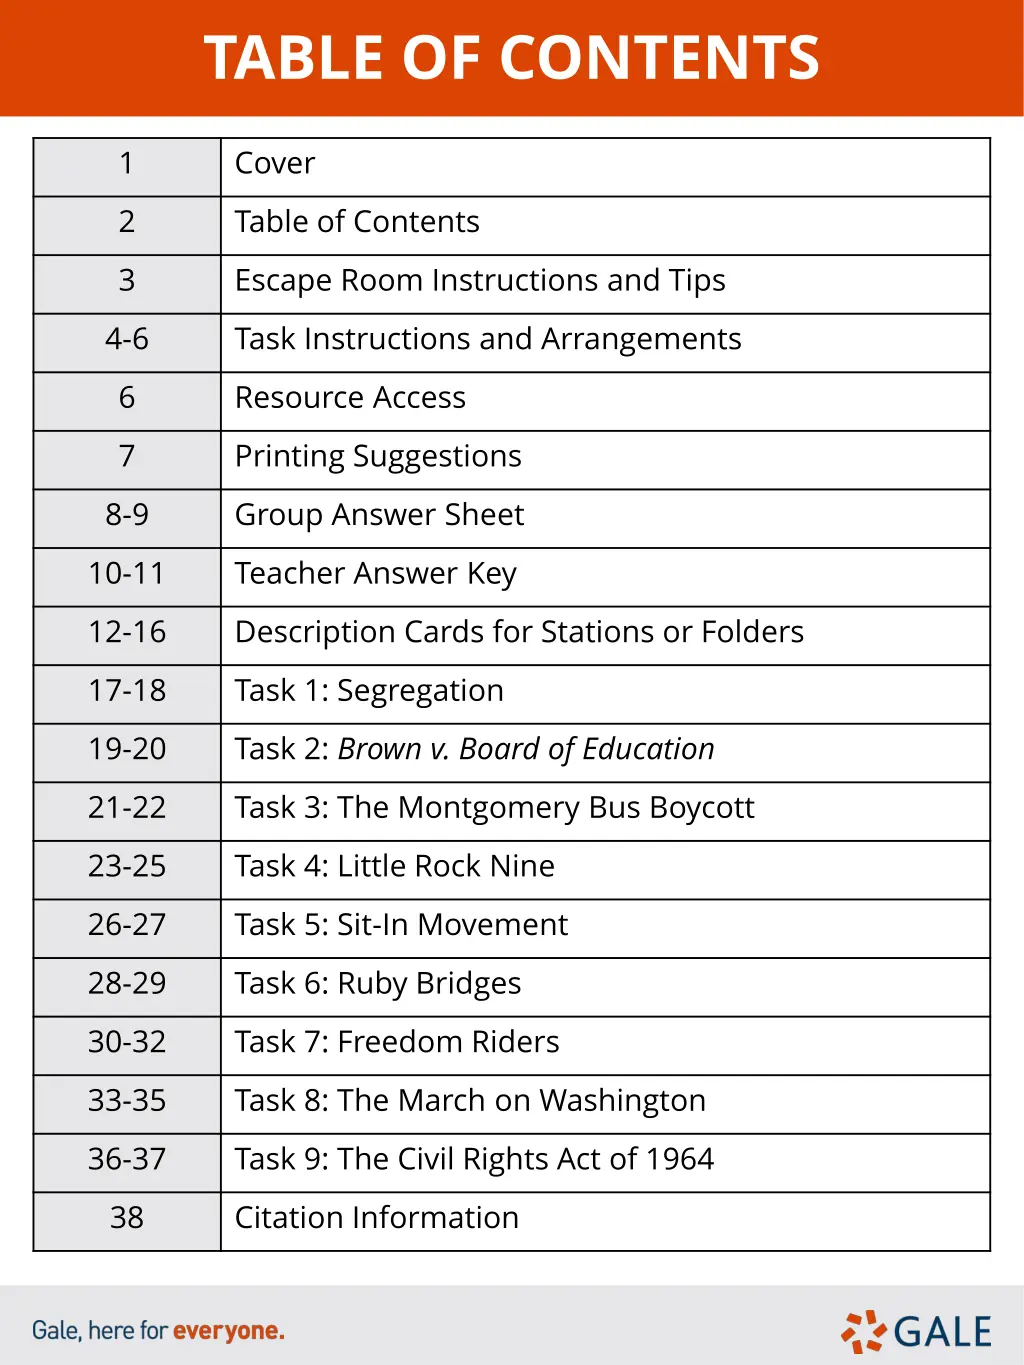 table of contents